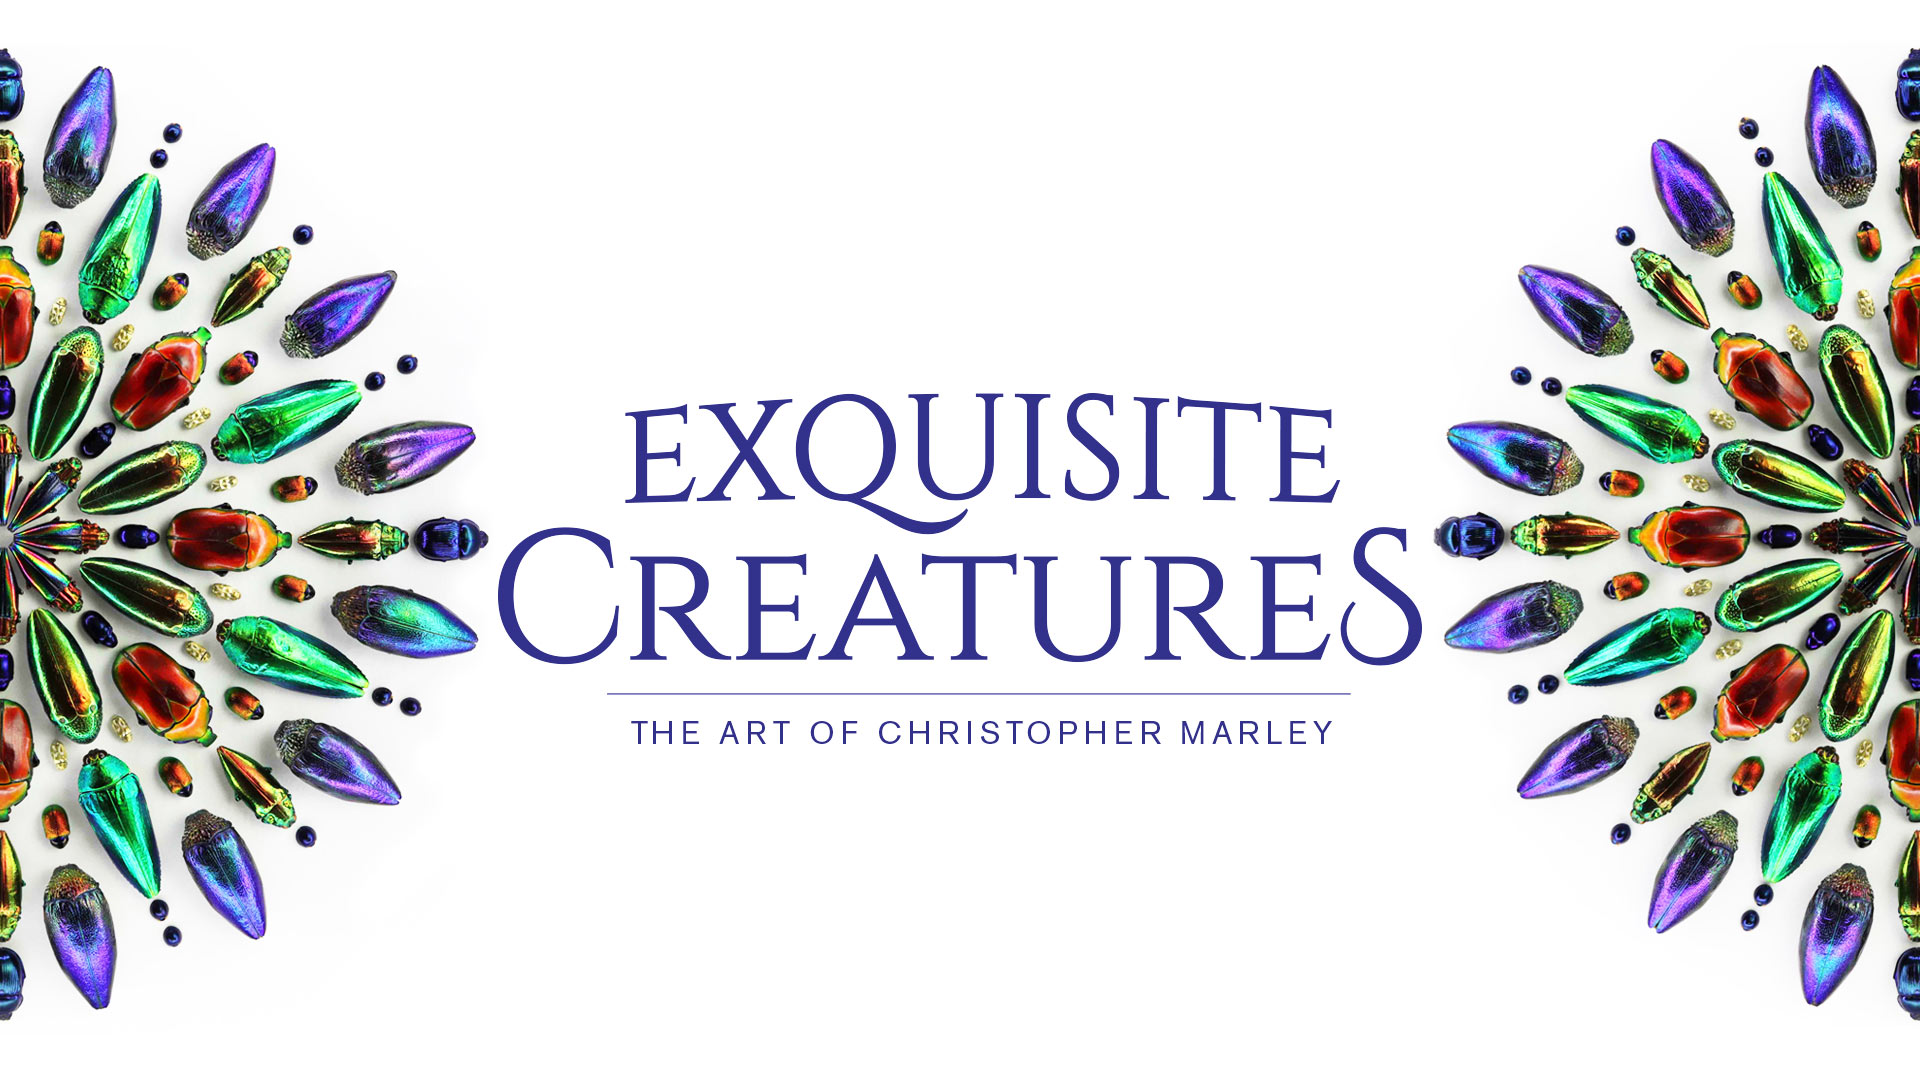 Exquisite Creatures: The Art of Christopher Marley